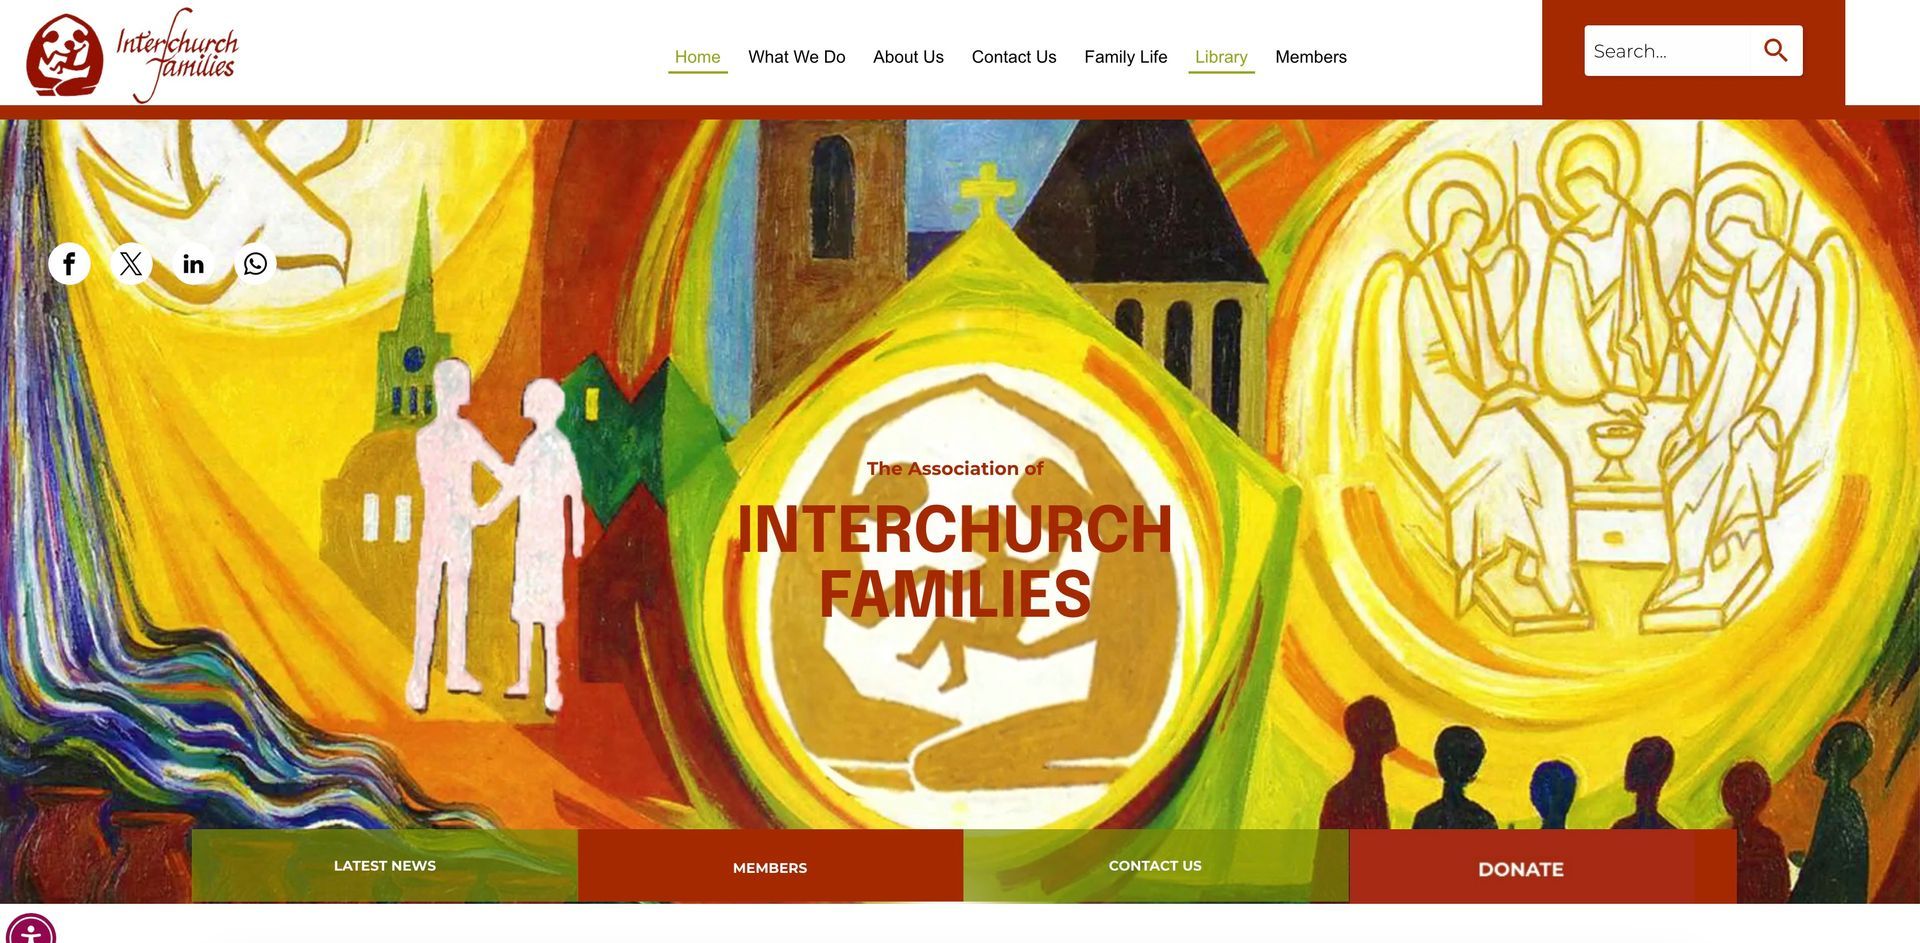 A website for interchurch families has a painting of a church and people on it.